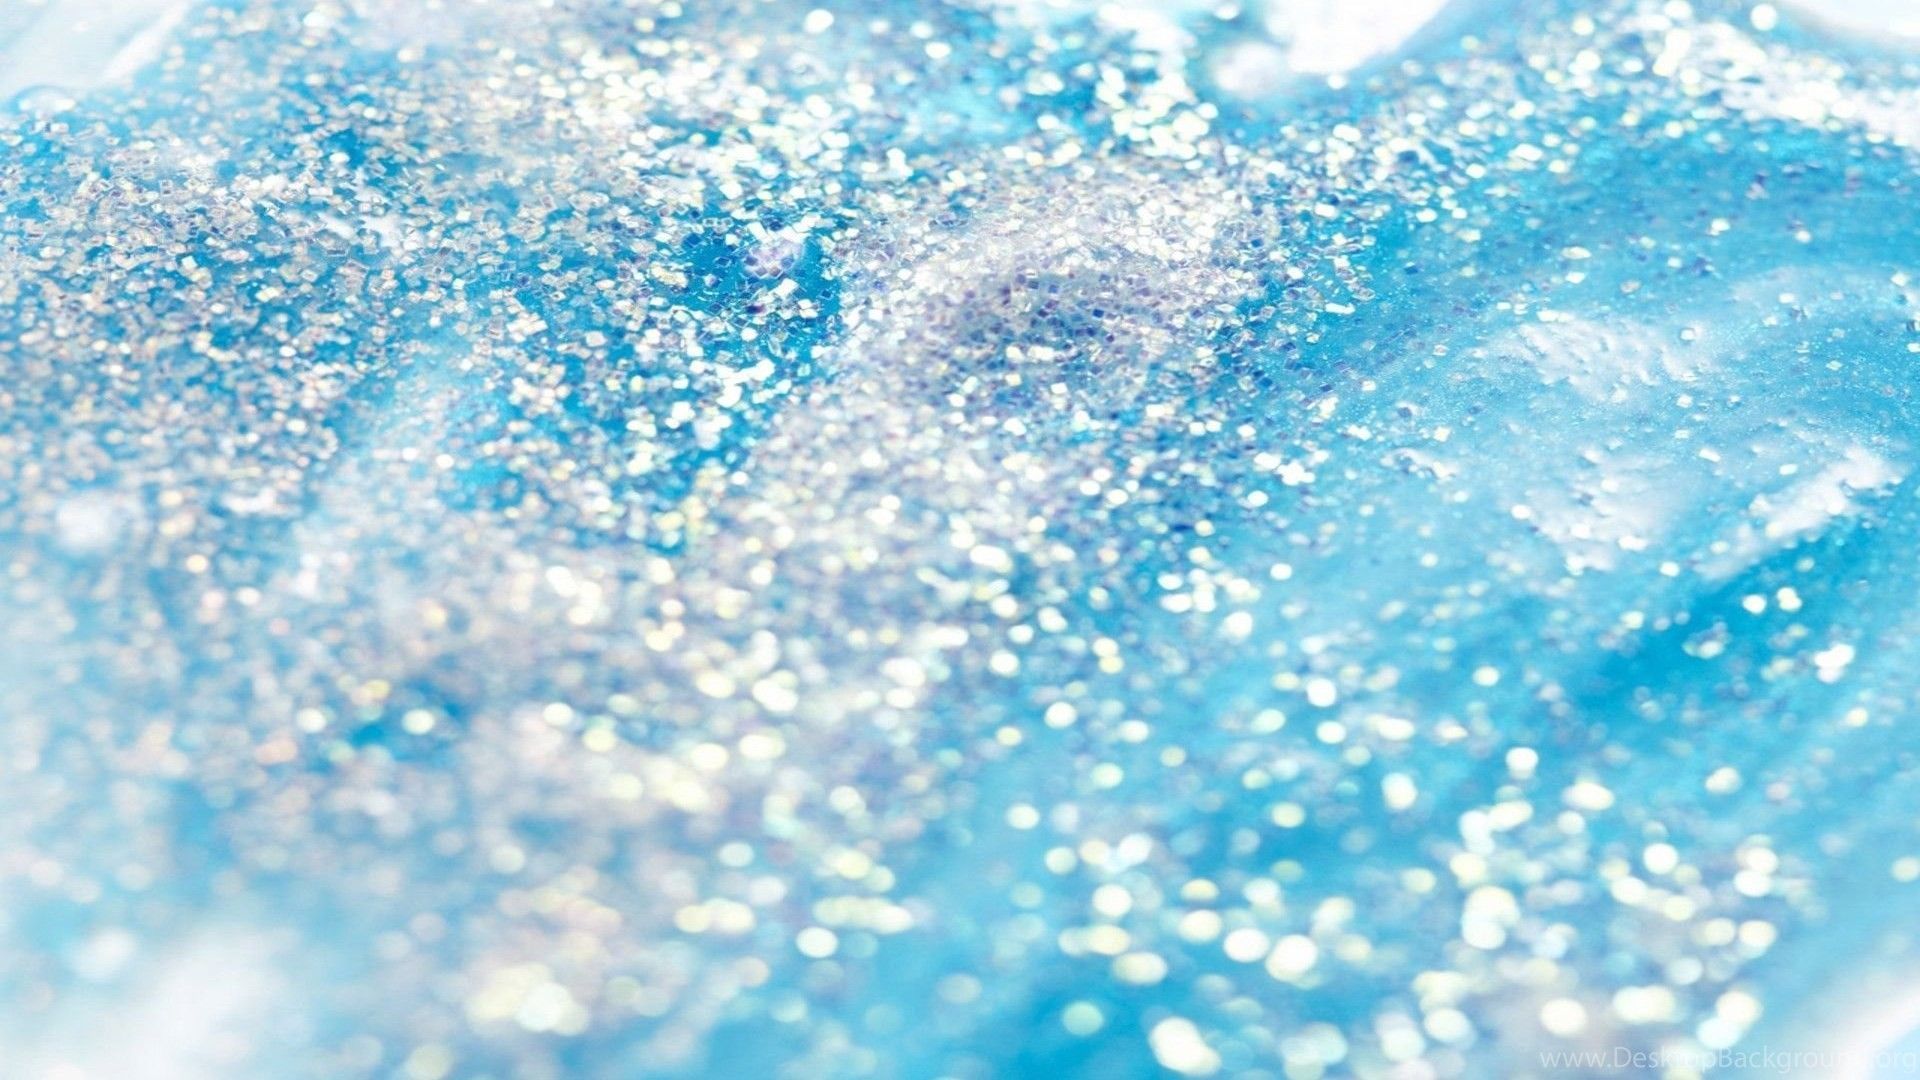 Blue and silver glitter on a white background - Glitter